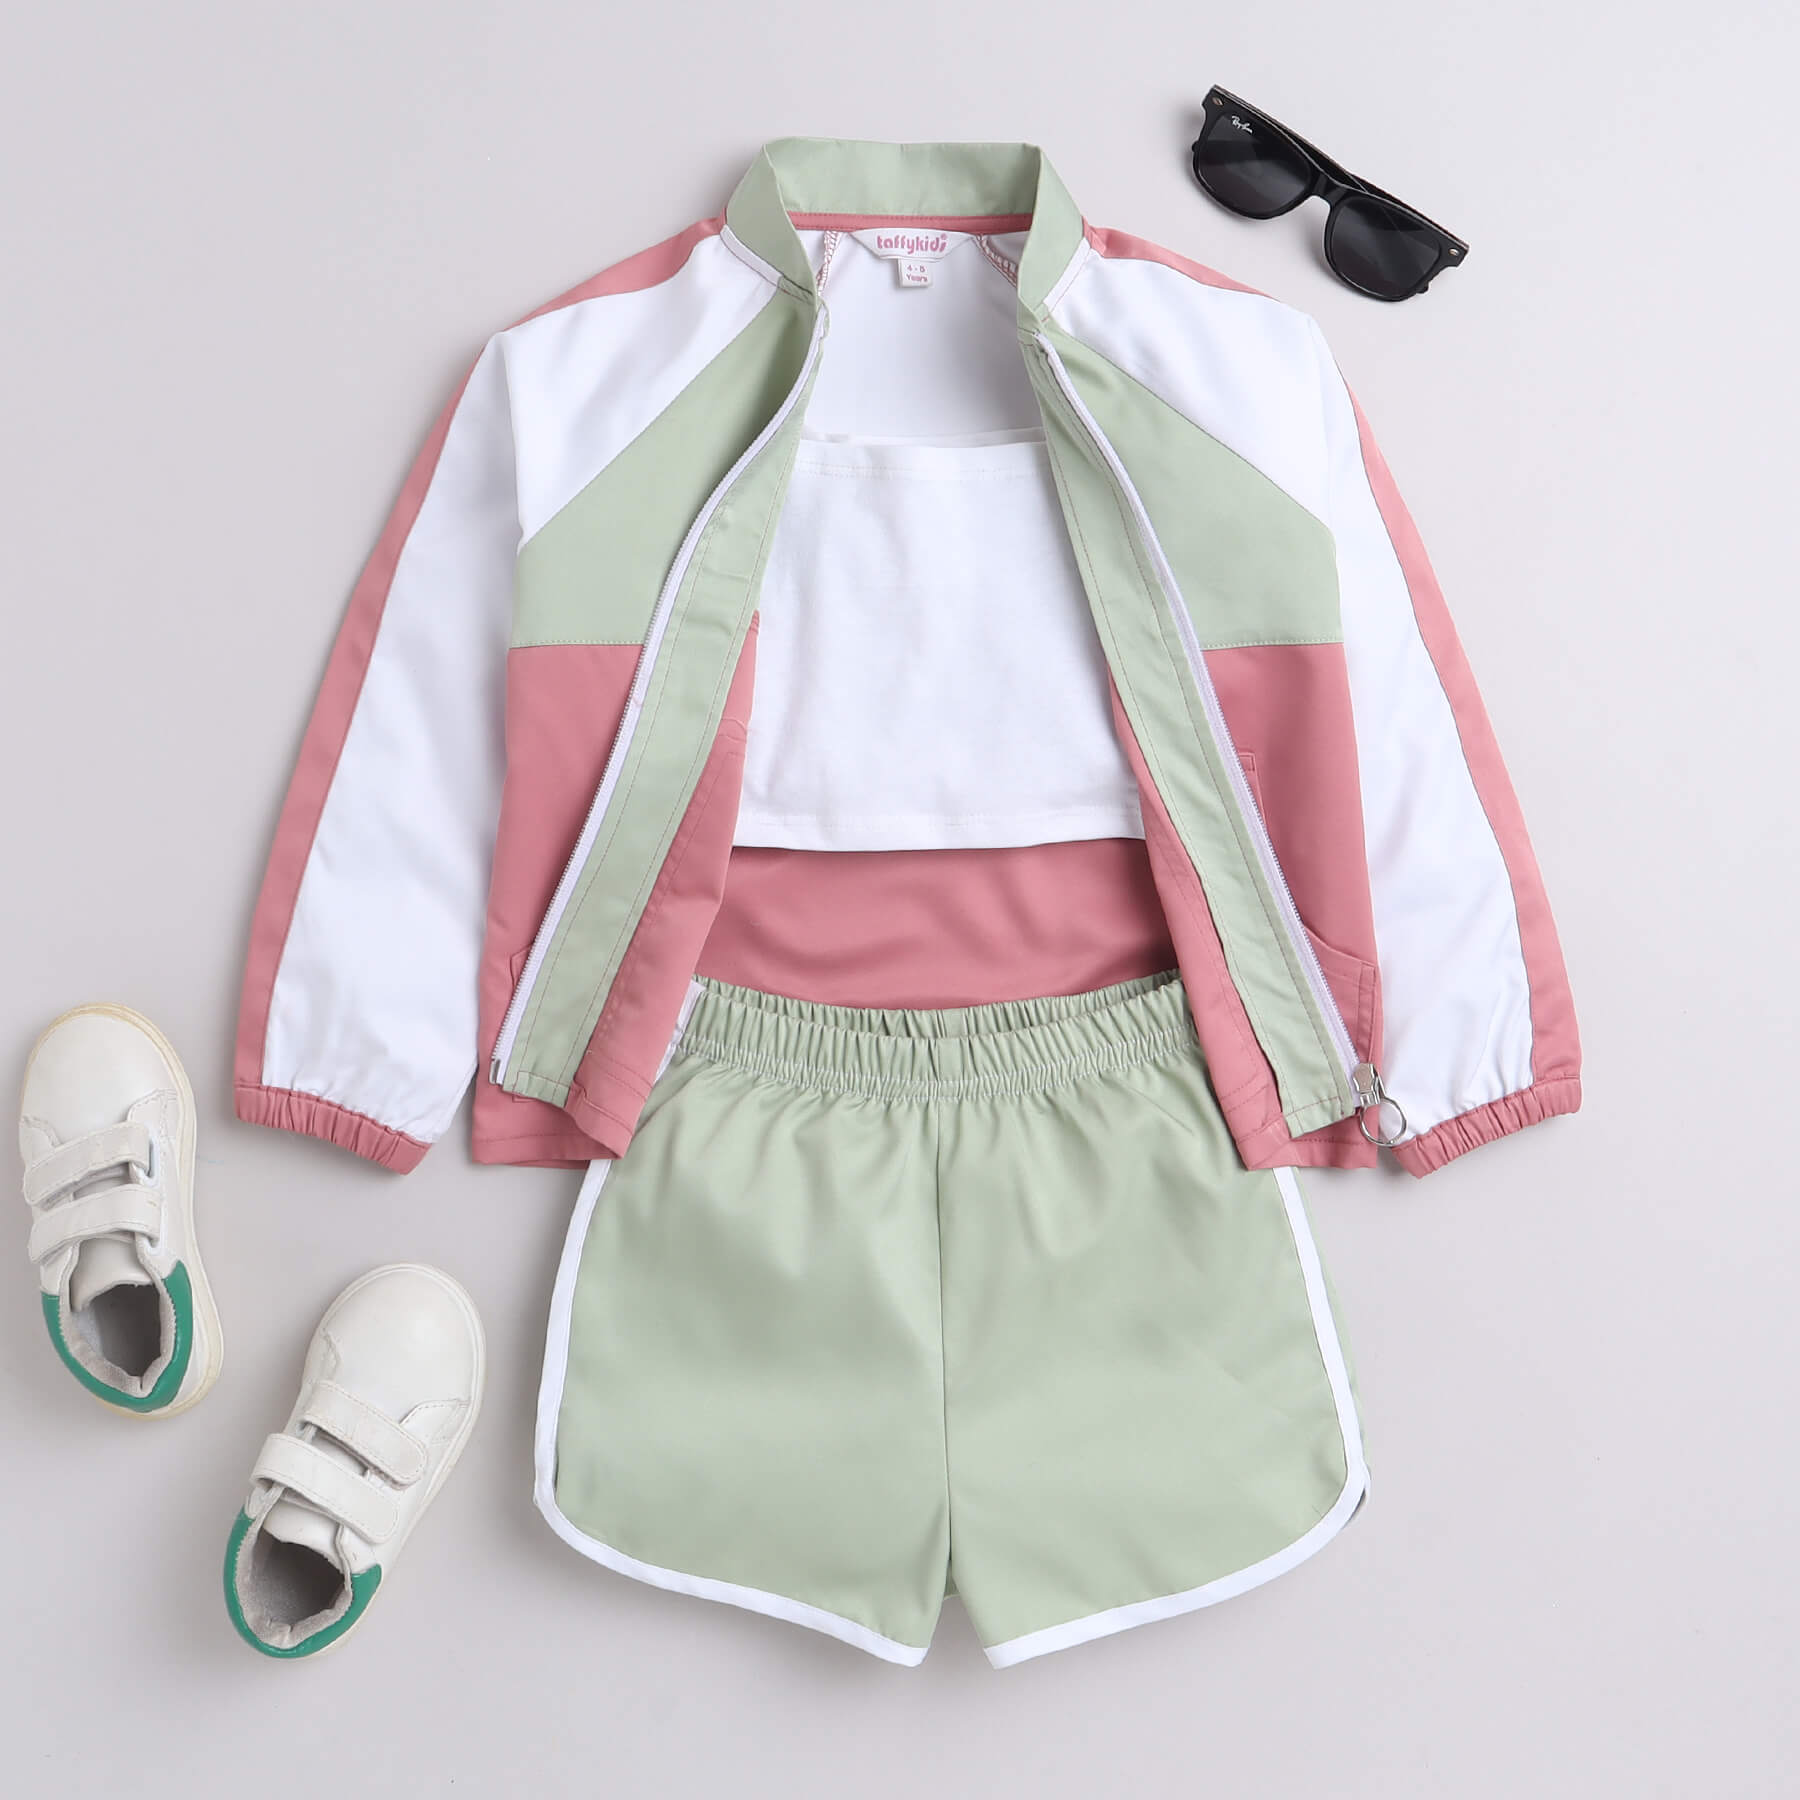 Taffykids full sleeves zip up Color block jacket with matching shorts and sleeveless inner set  -Multi